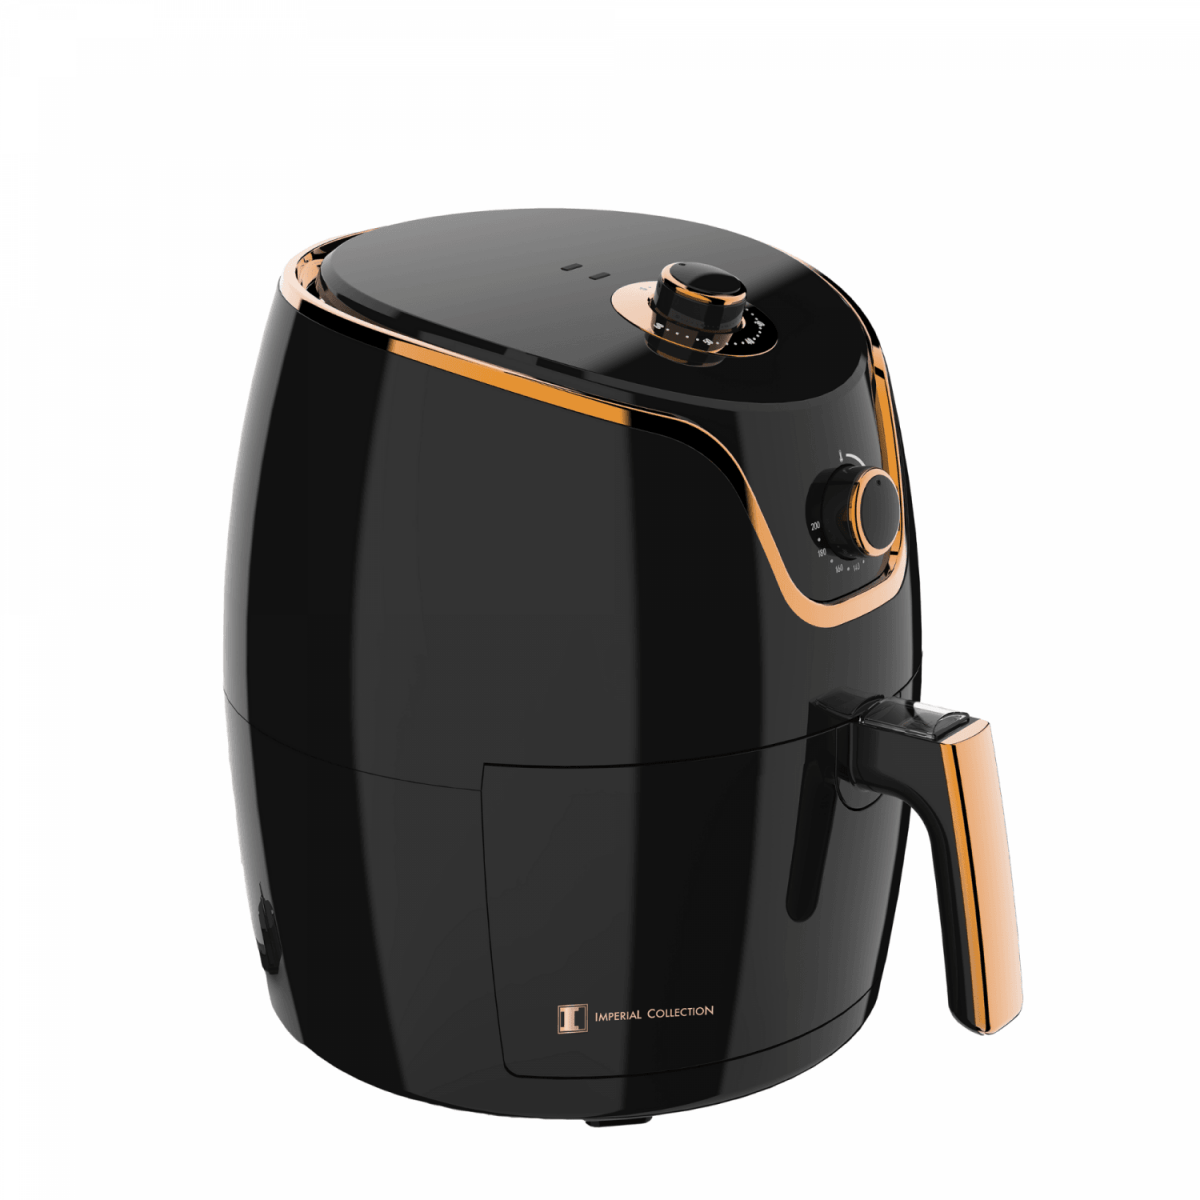 Airfryer 1700W - Veilingcoach.be